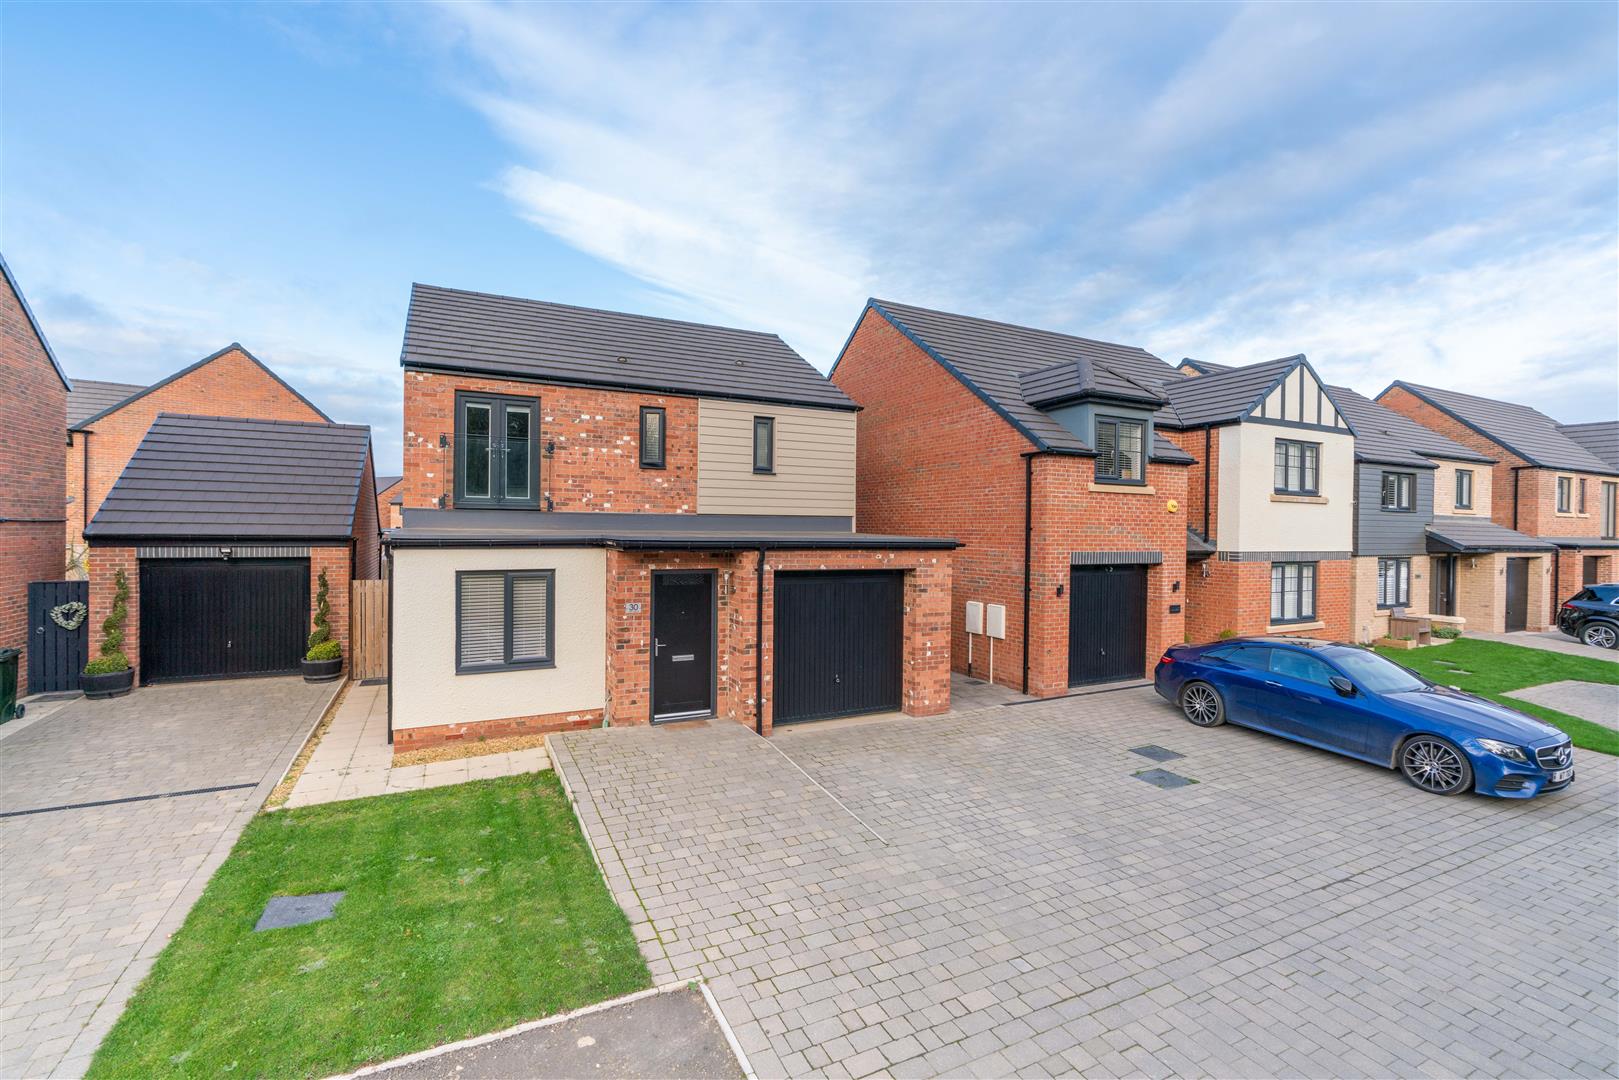 3 bed detached house for sale in Collier Gardens, Newcastle Upon Tyne, NE13